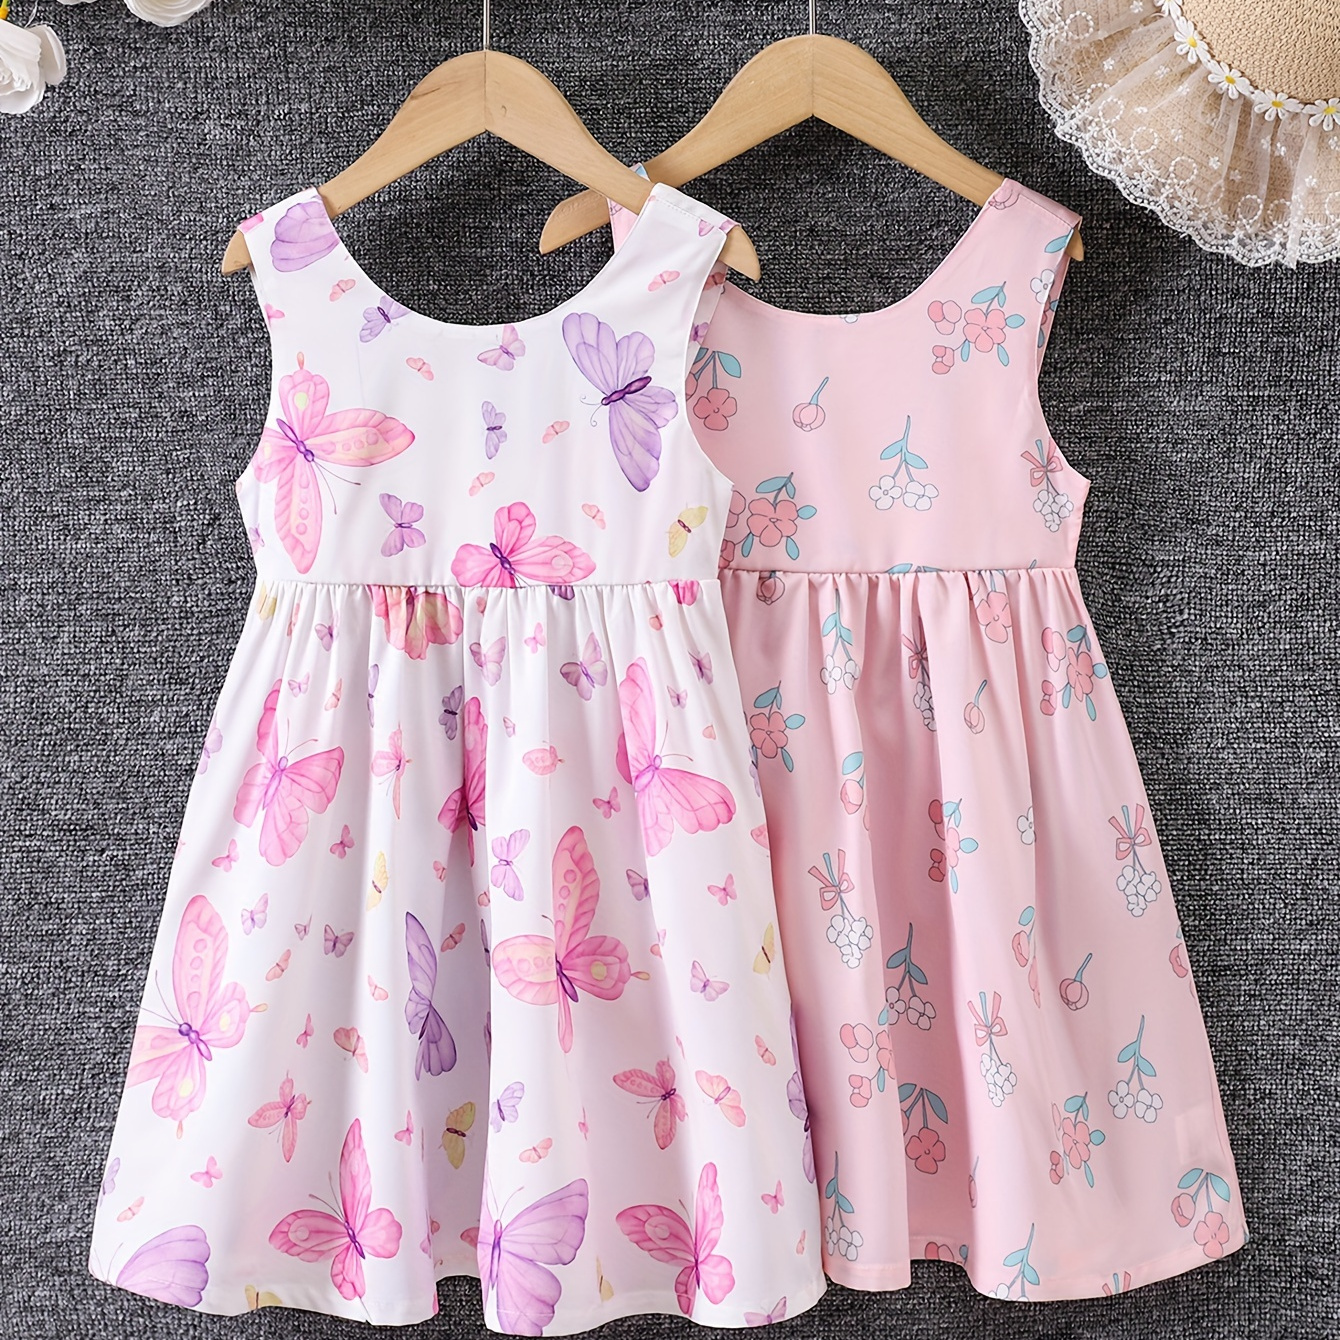 

2pcs Girls' Sleeveless Dress Set, Pink Floral & Butterfly Print Casual Sundresses, Cute Style, Perfect For Spring/summer - Twin Pack